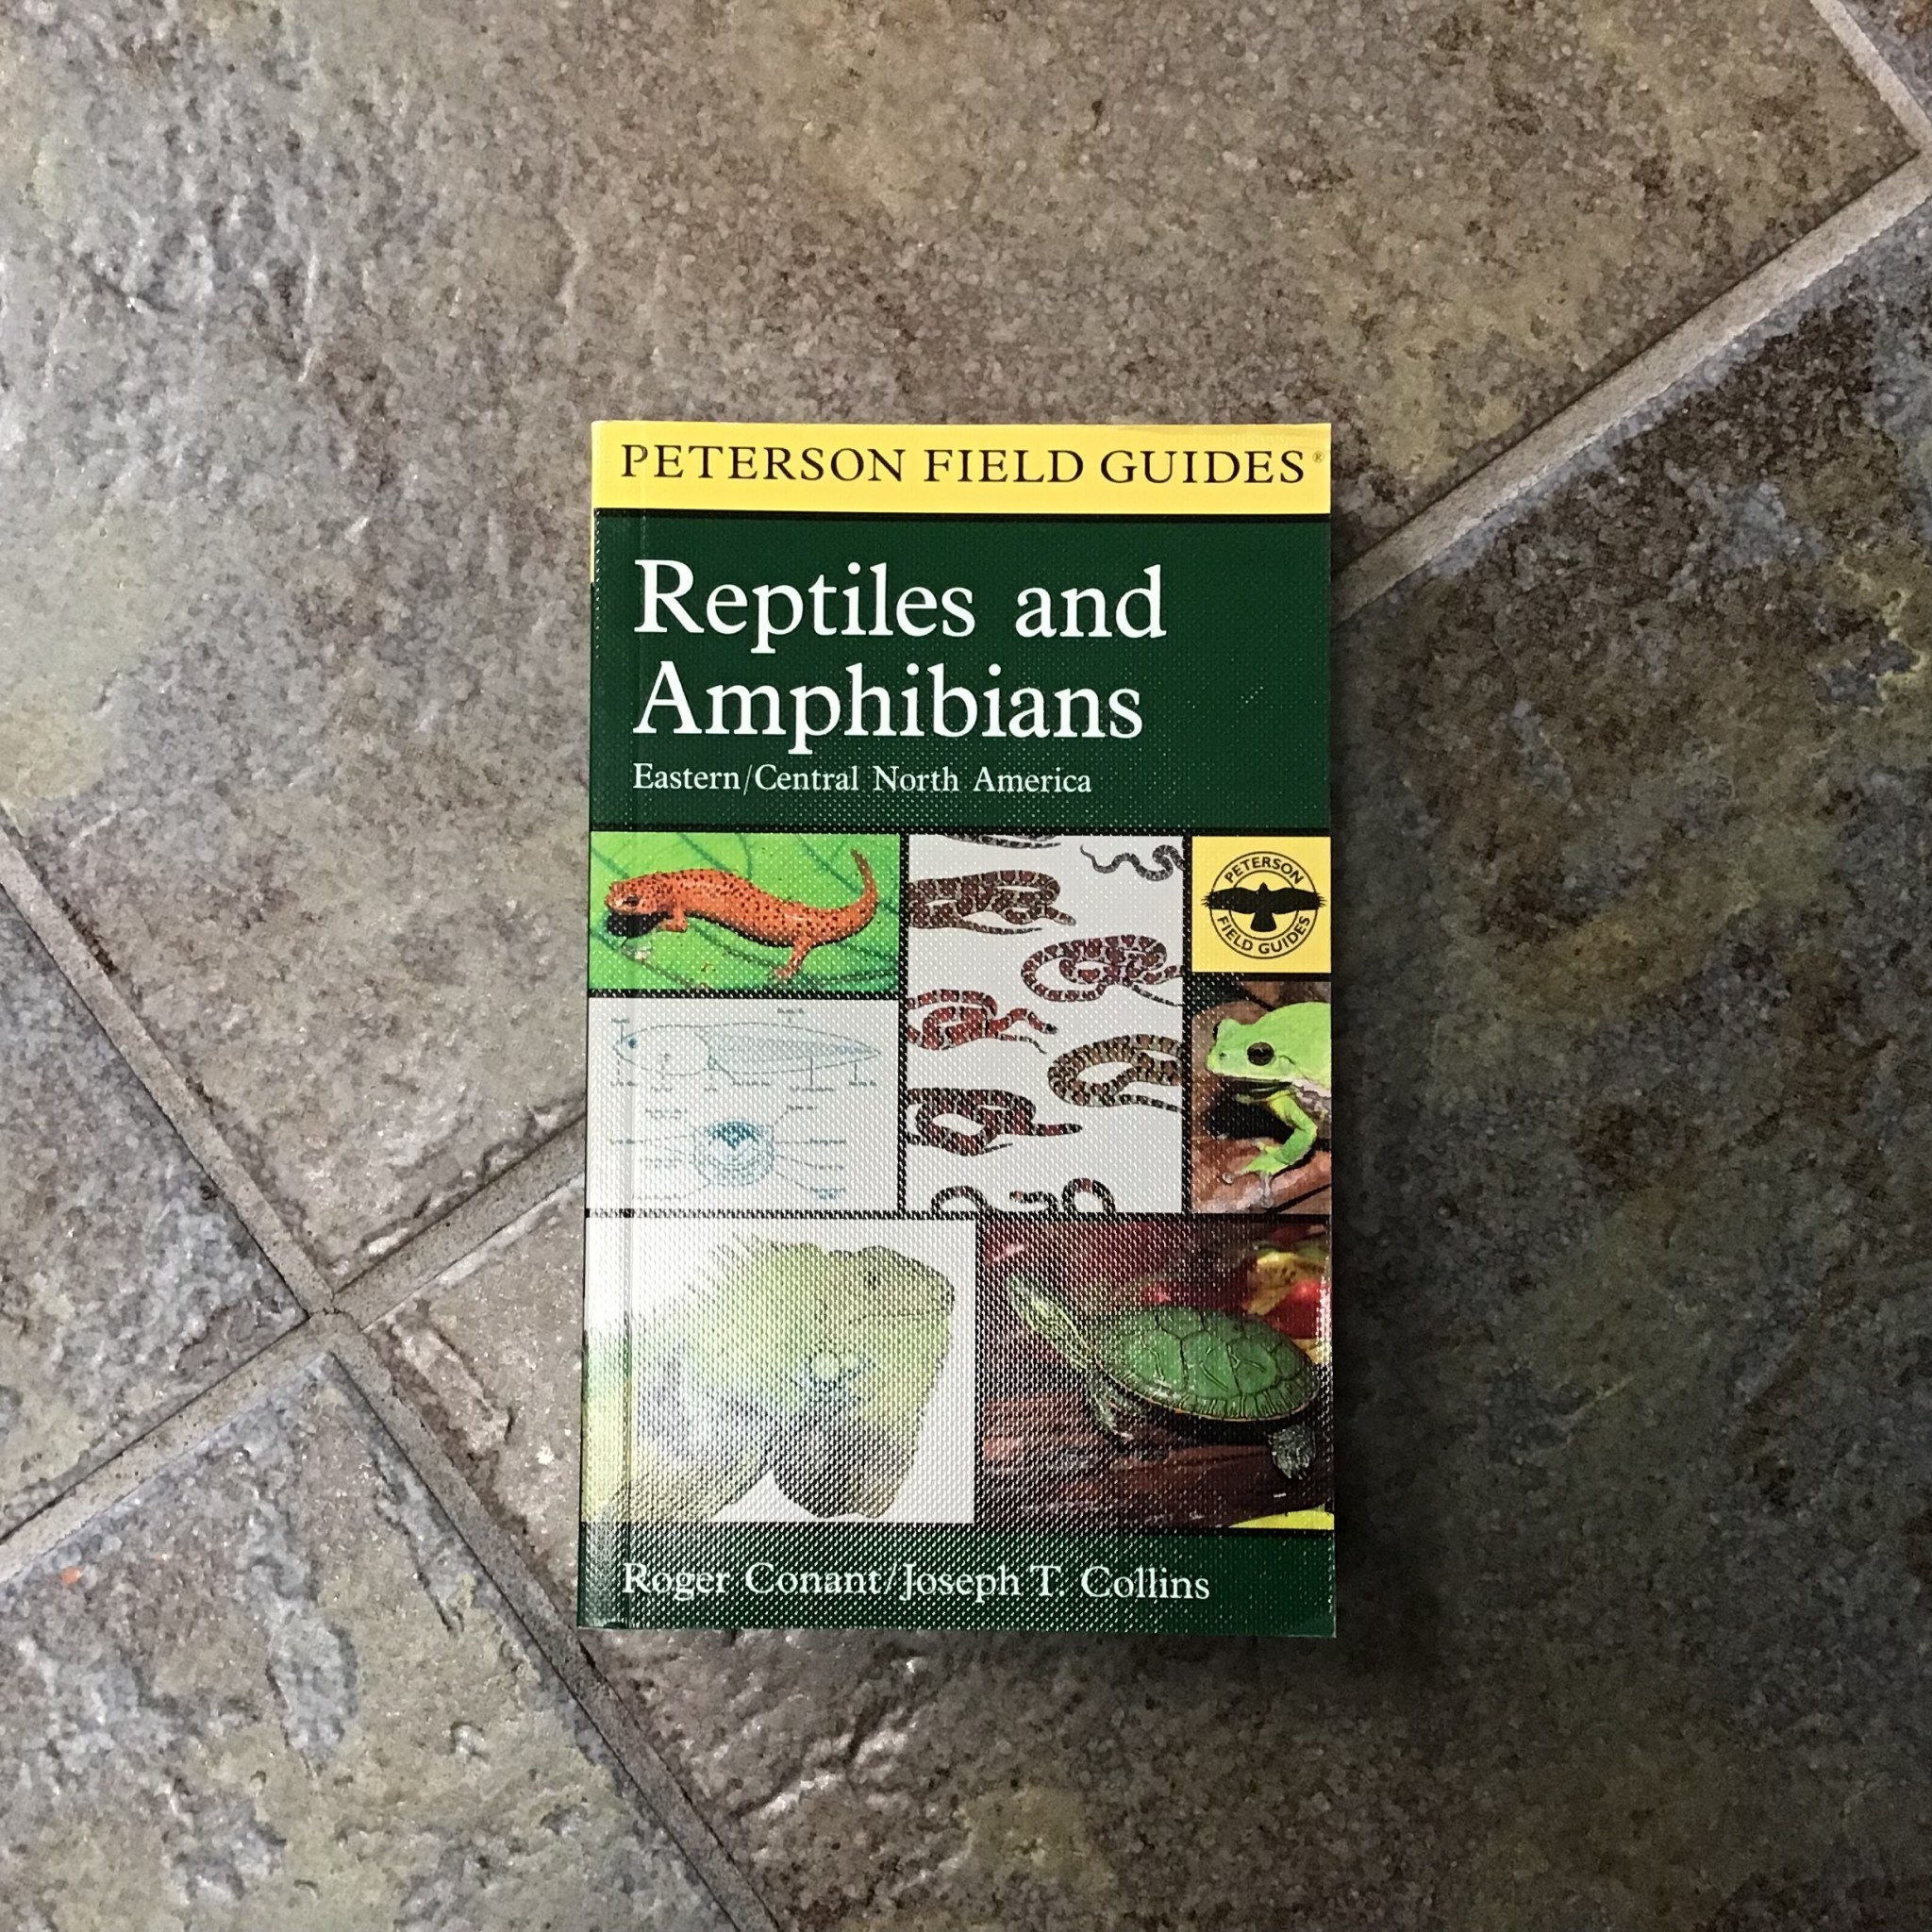 PETERSON FIELD GUIDE REPTILES AND AMPHIBIANS